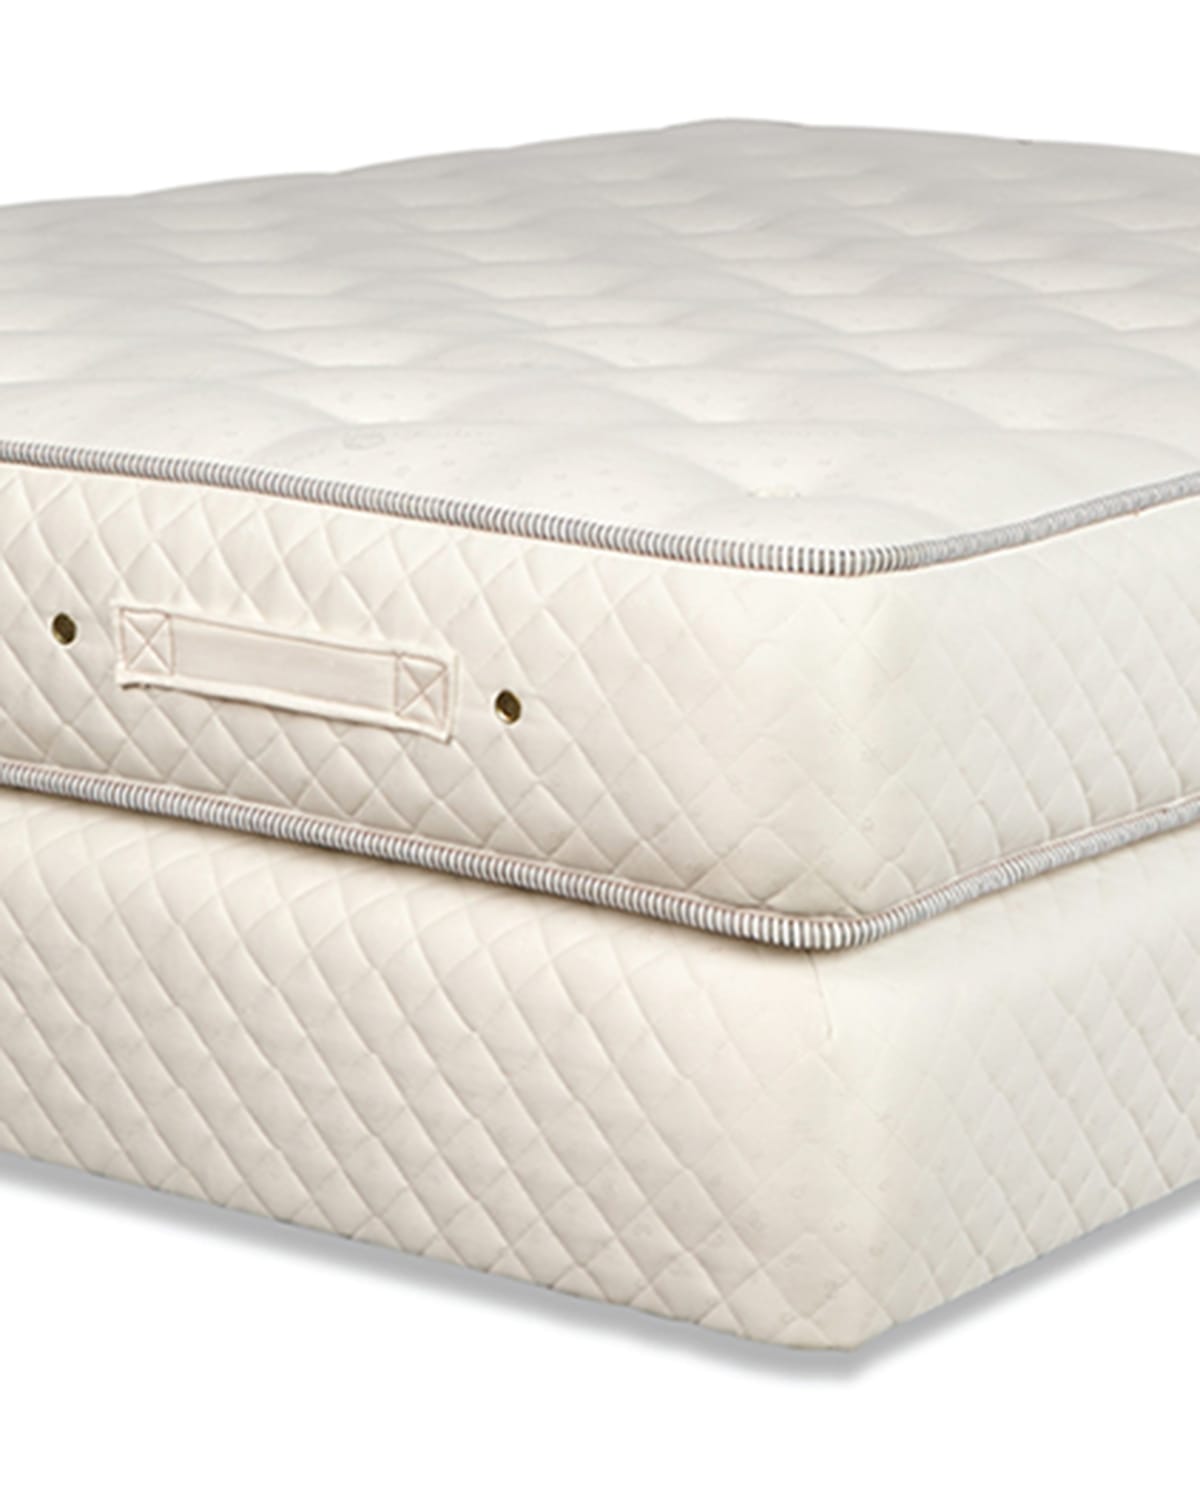 Royal-pedic Dream Spring Limited Firm Full Mattress Set In White